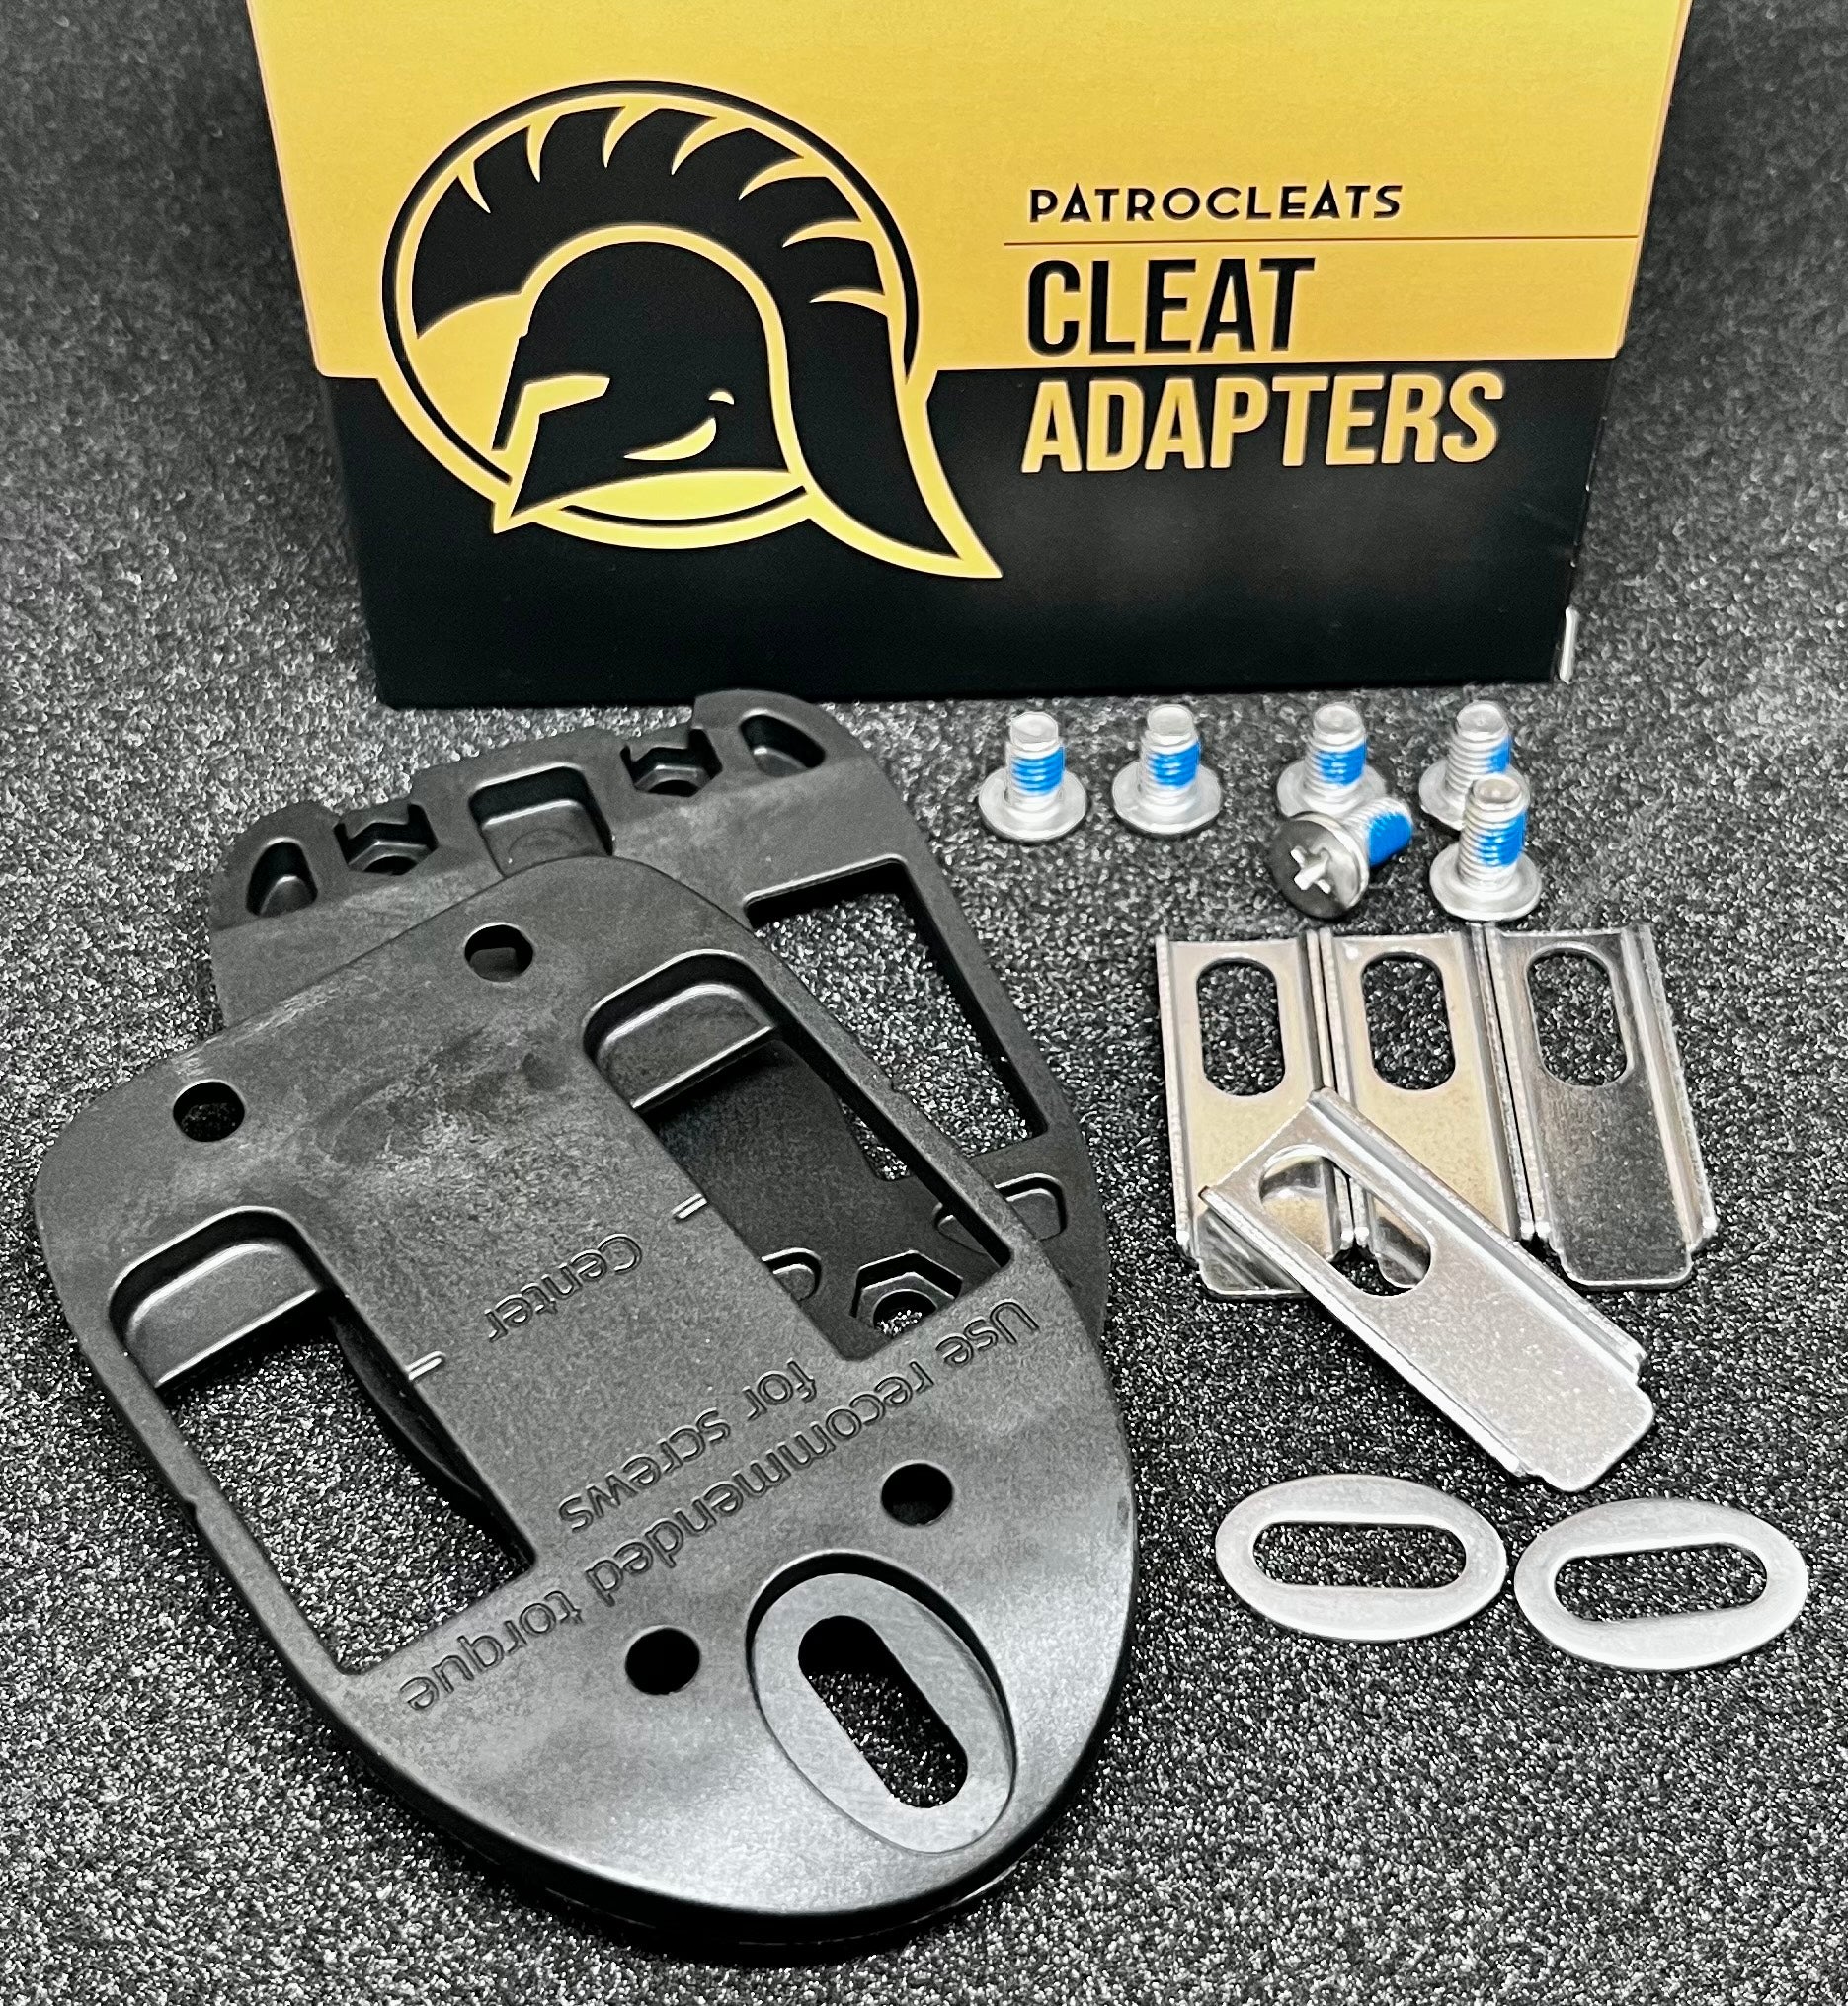 Cleat adapters for mortons neuroma, metatarsalgia, hot spots and other foot pain when cycling. SppedPlay Kit.